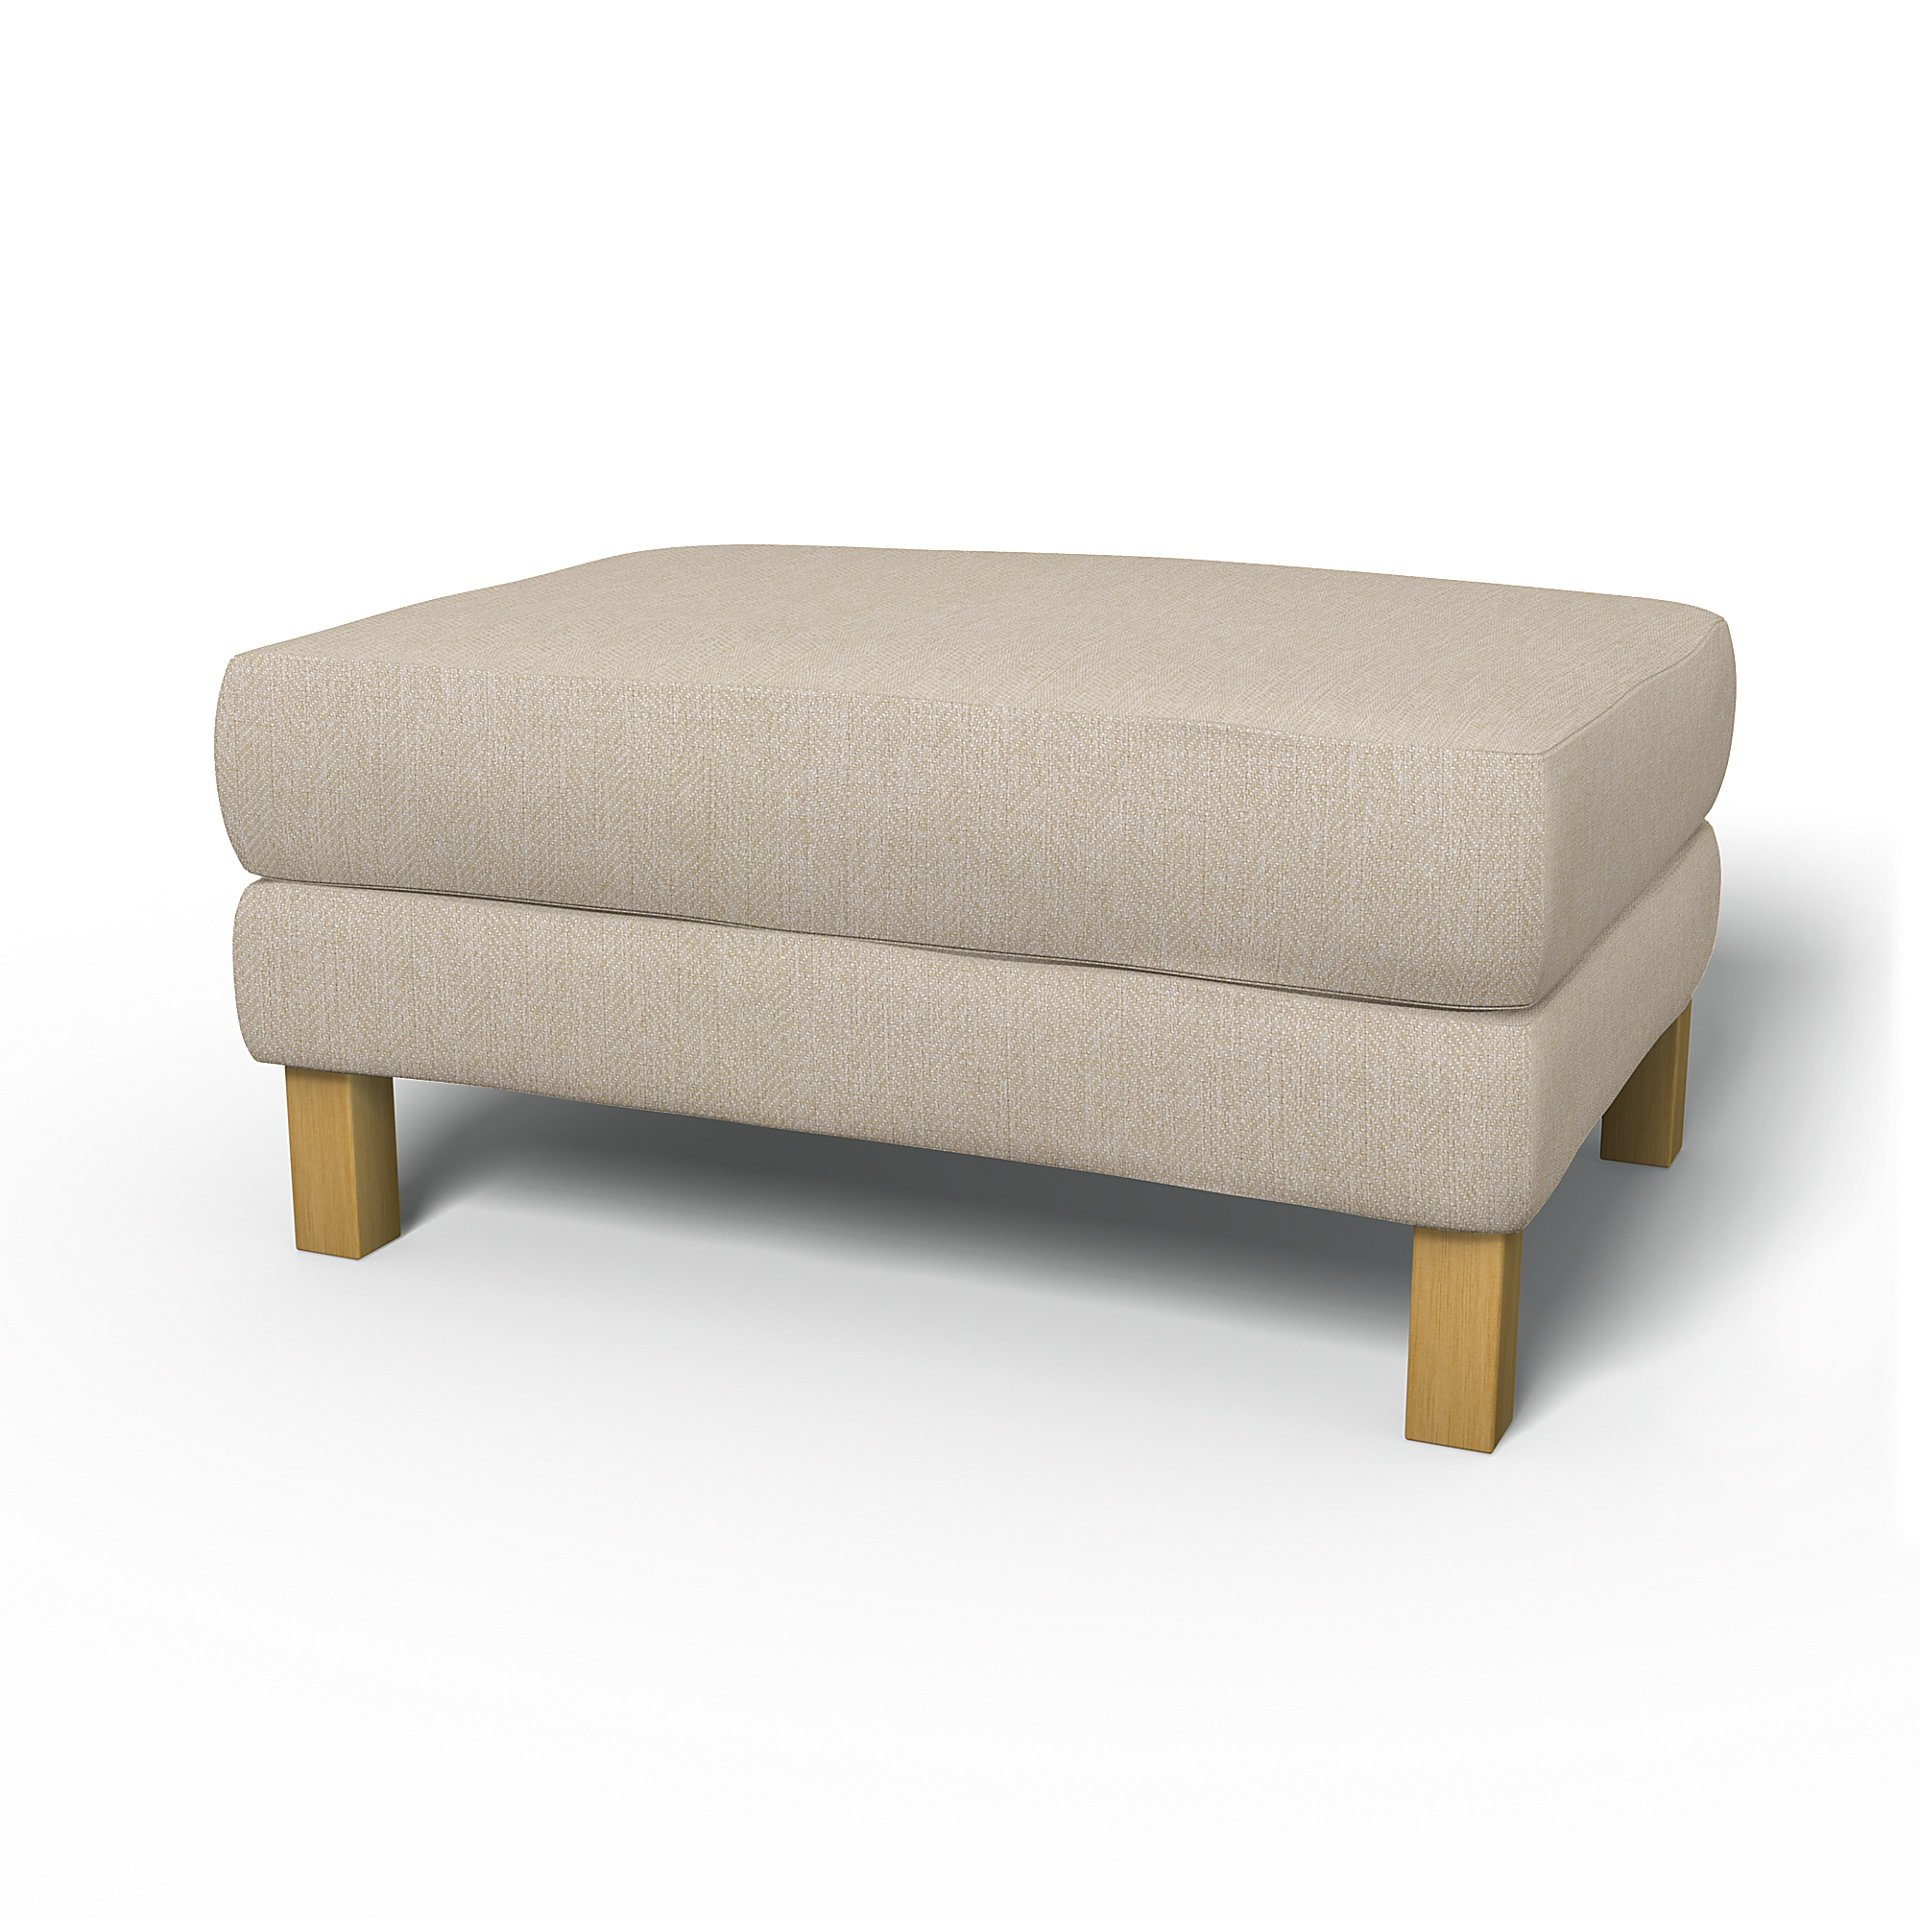 IKEA - Karlstad Footstool Cover, Natural, Boucle & Texture - Bemz